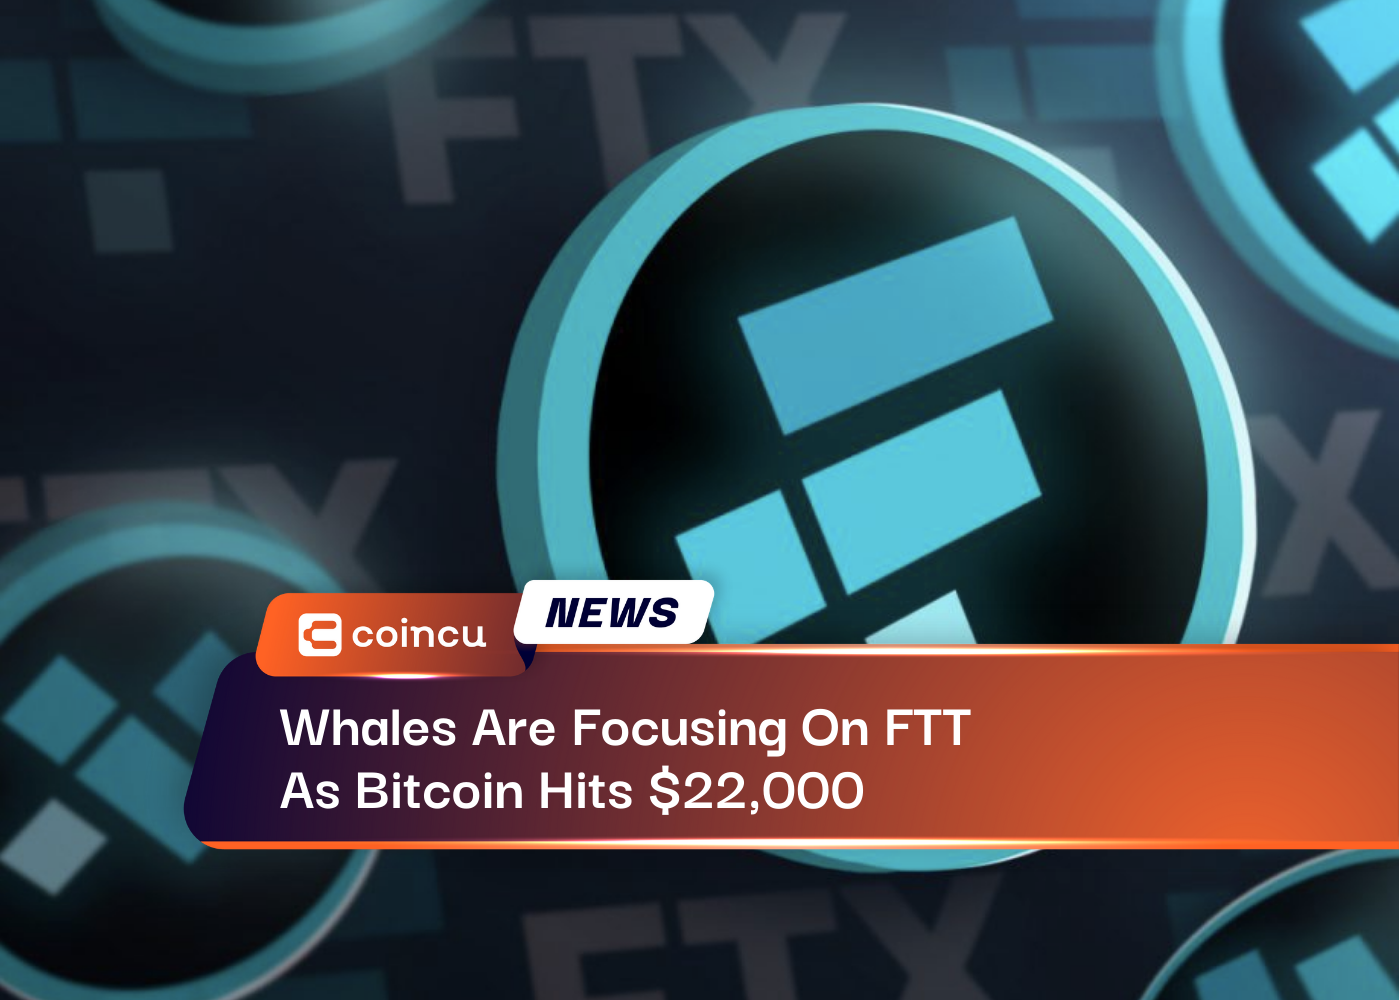 Whales Are Focusing On FTT As Bitcoin Hits $22,000